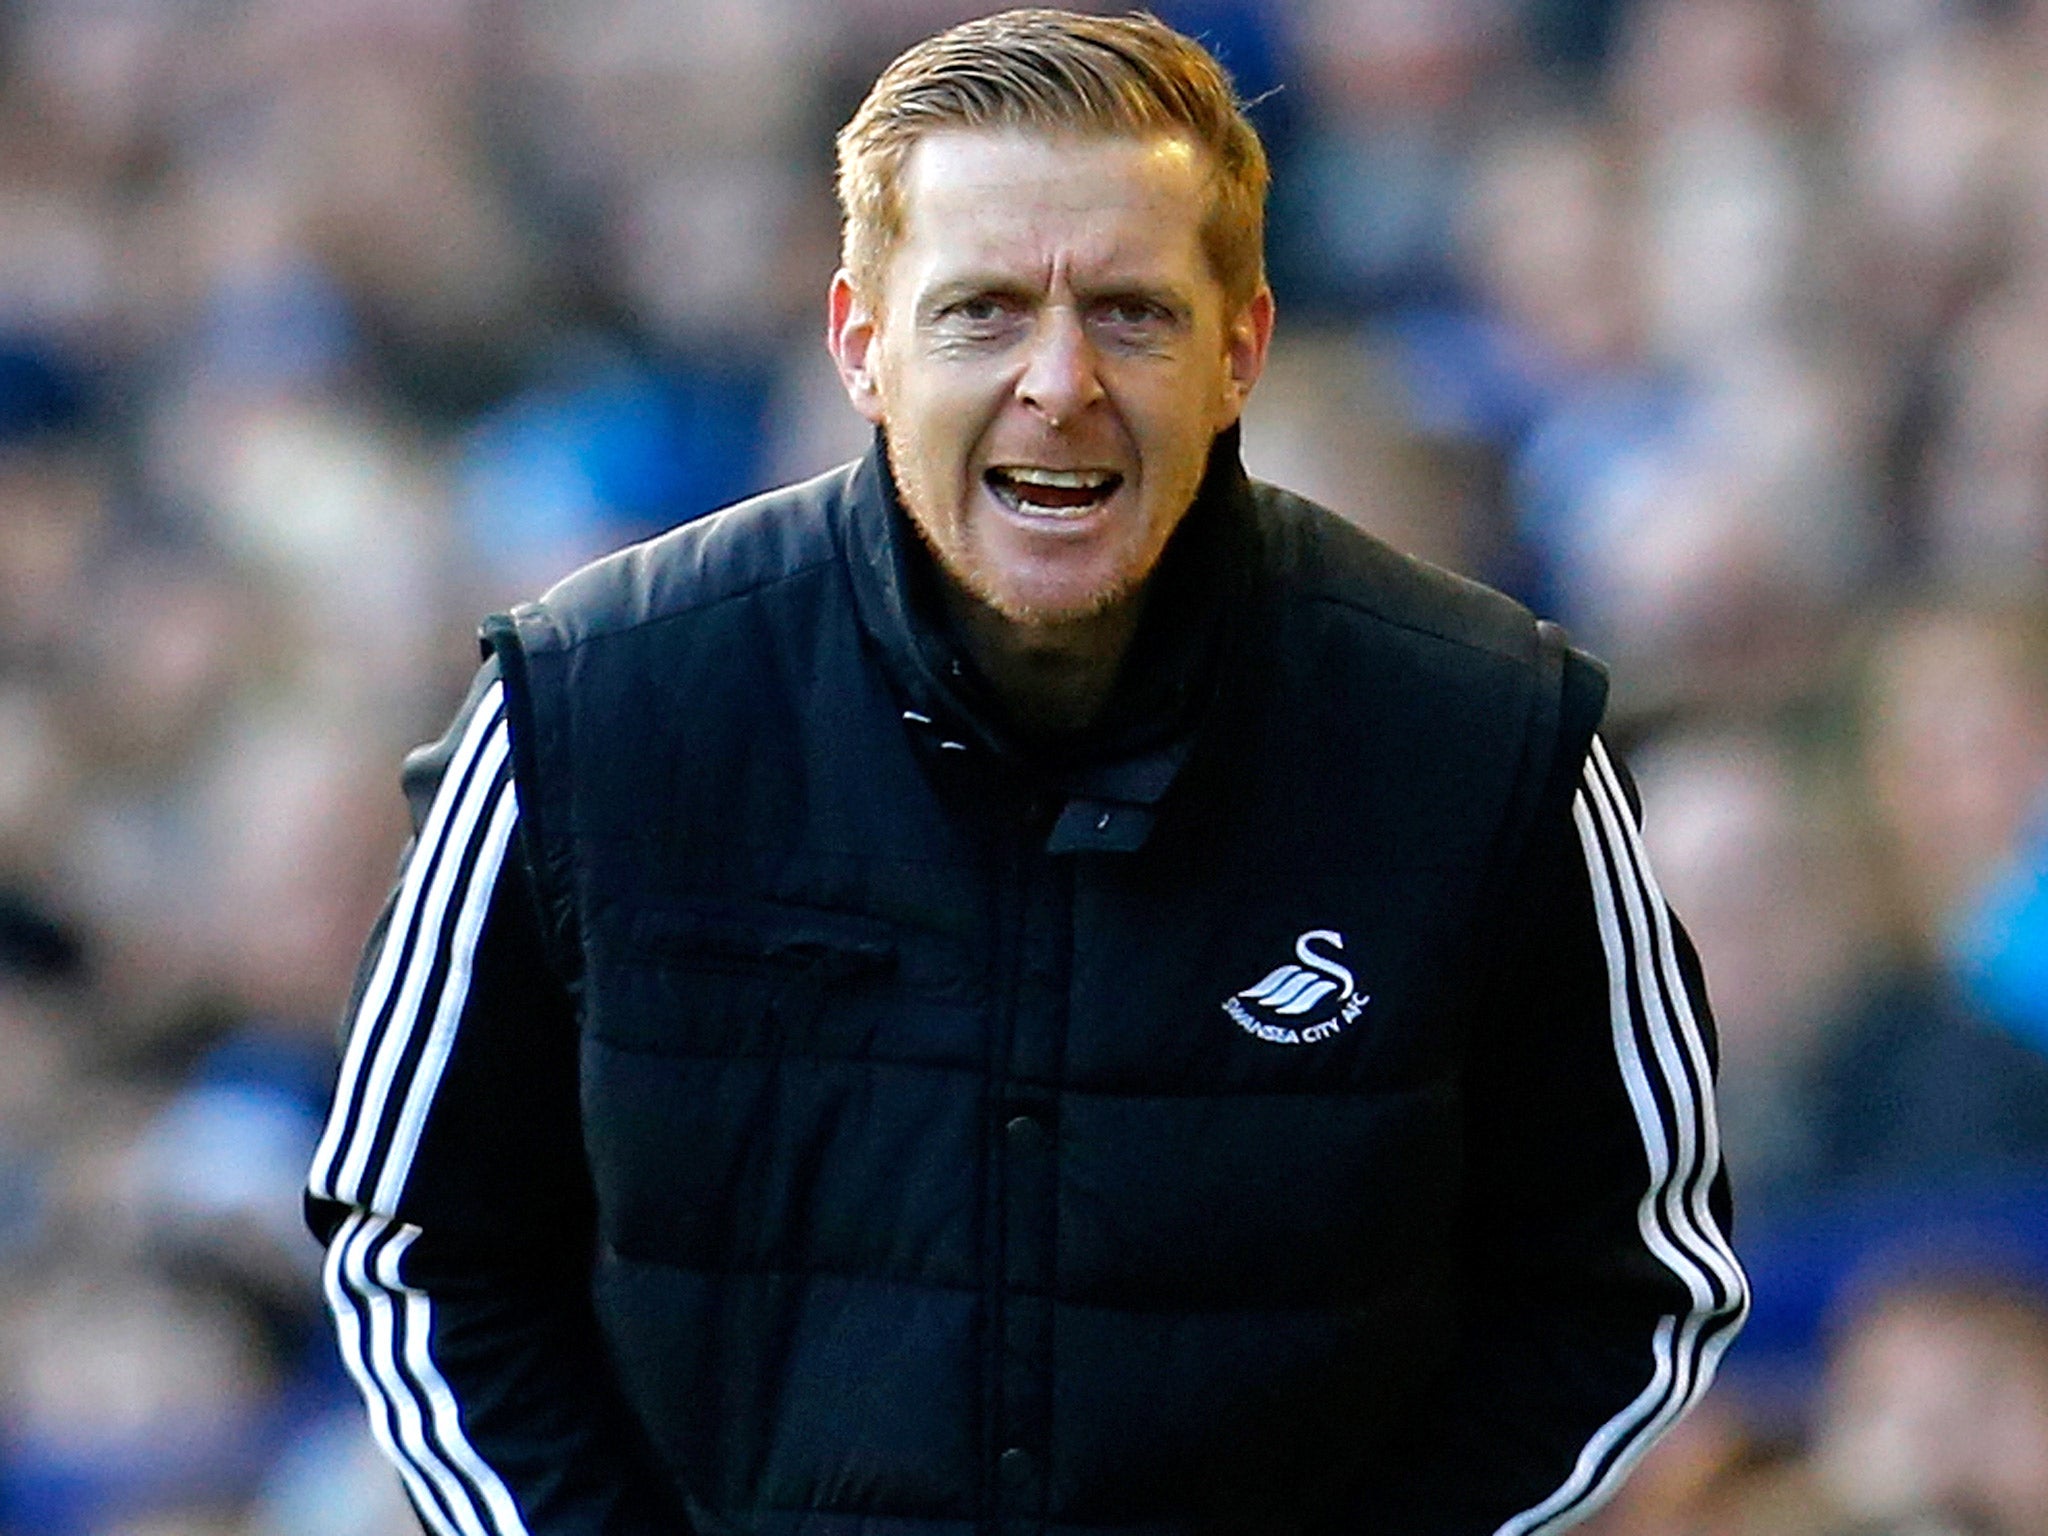 Garry Monk had been working on a temporary basis